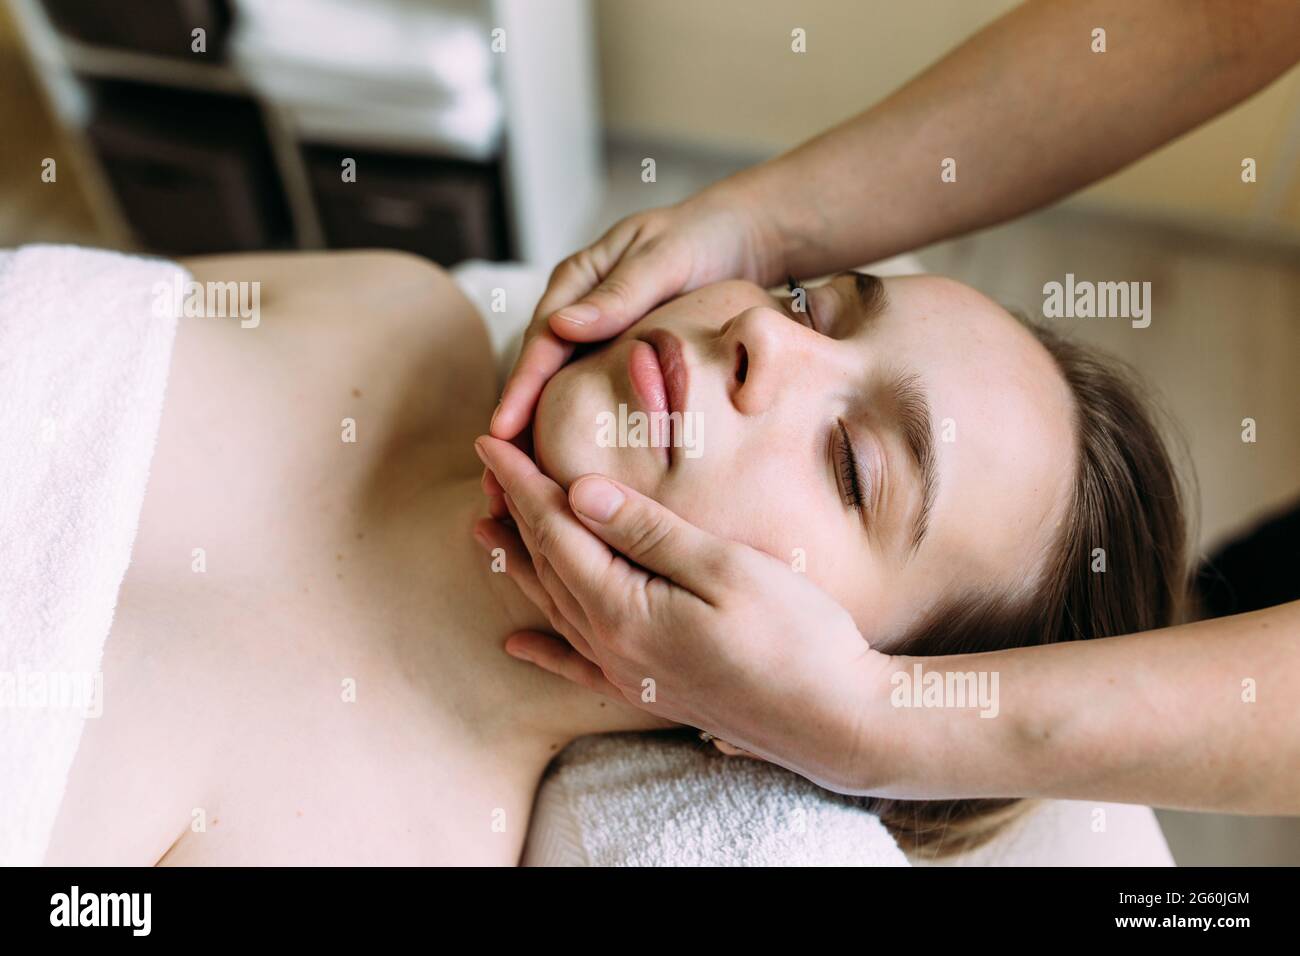 Masseur doing massage on a woman's face at the spa. Stock Photo